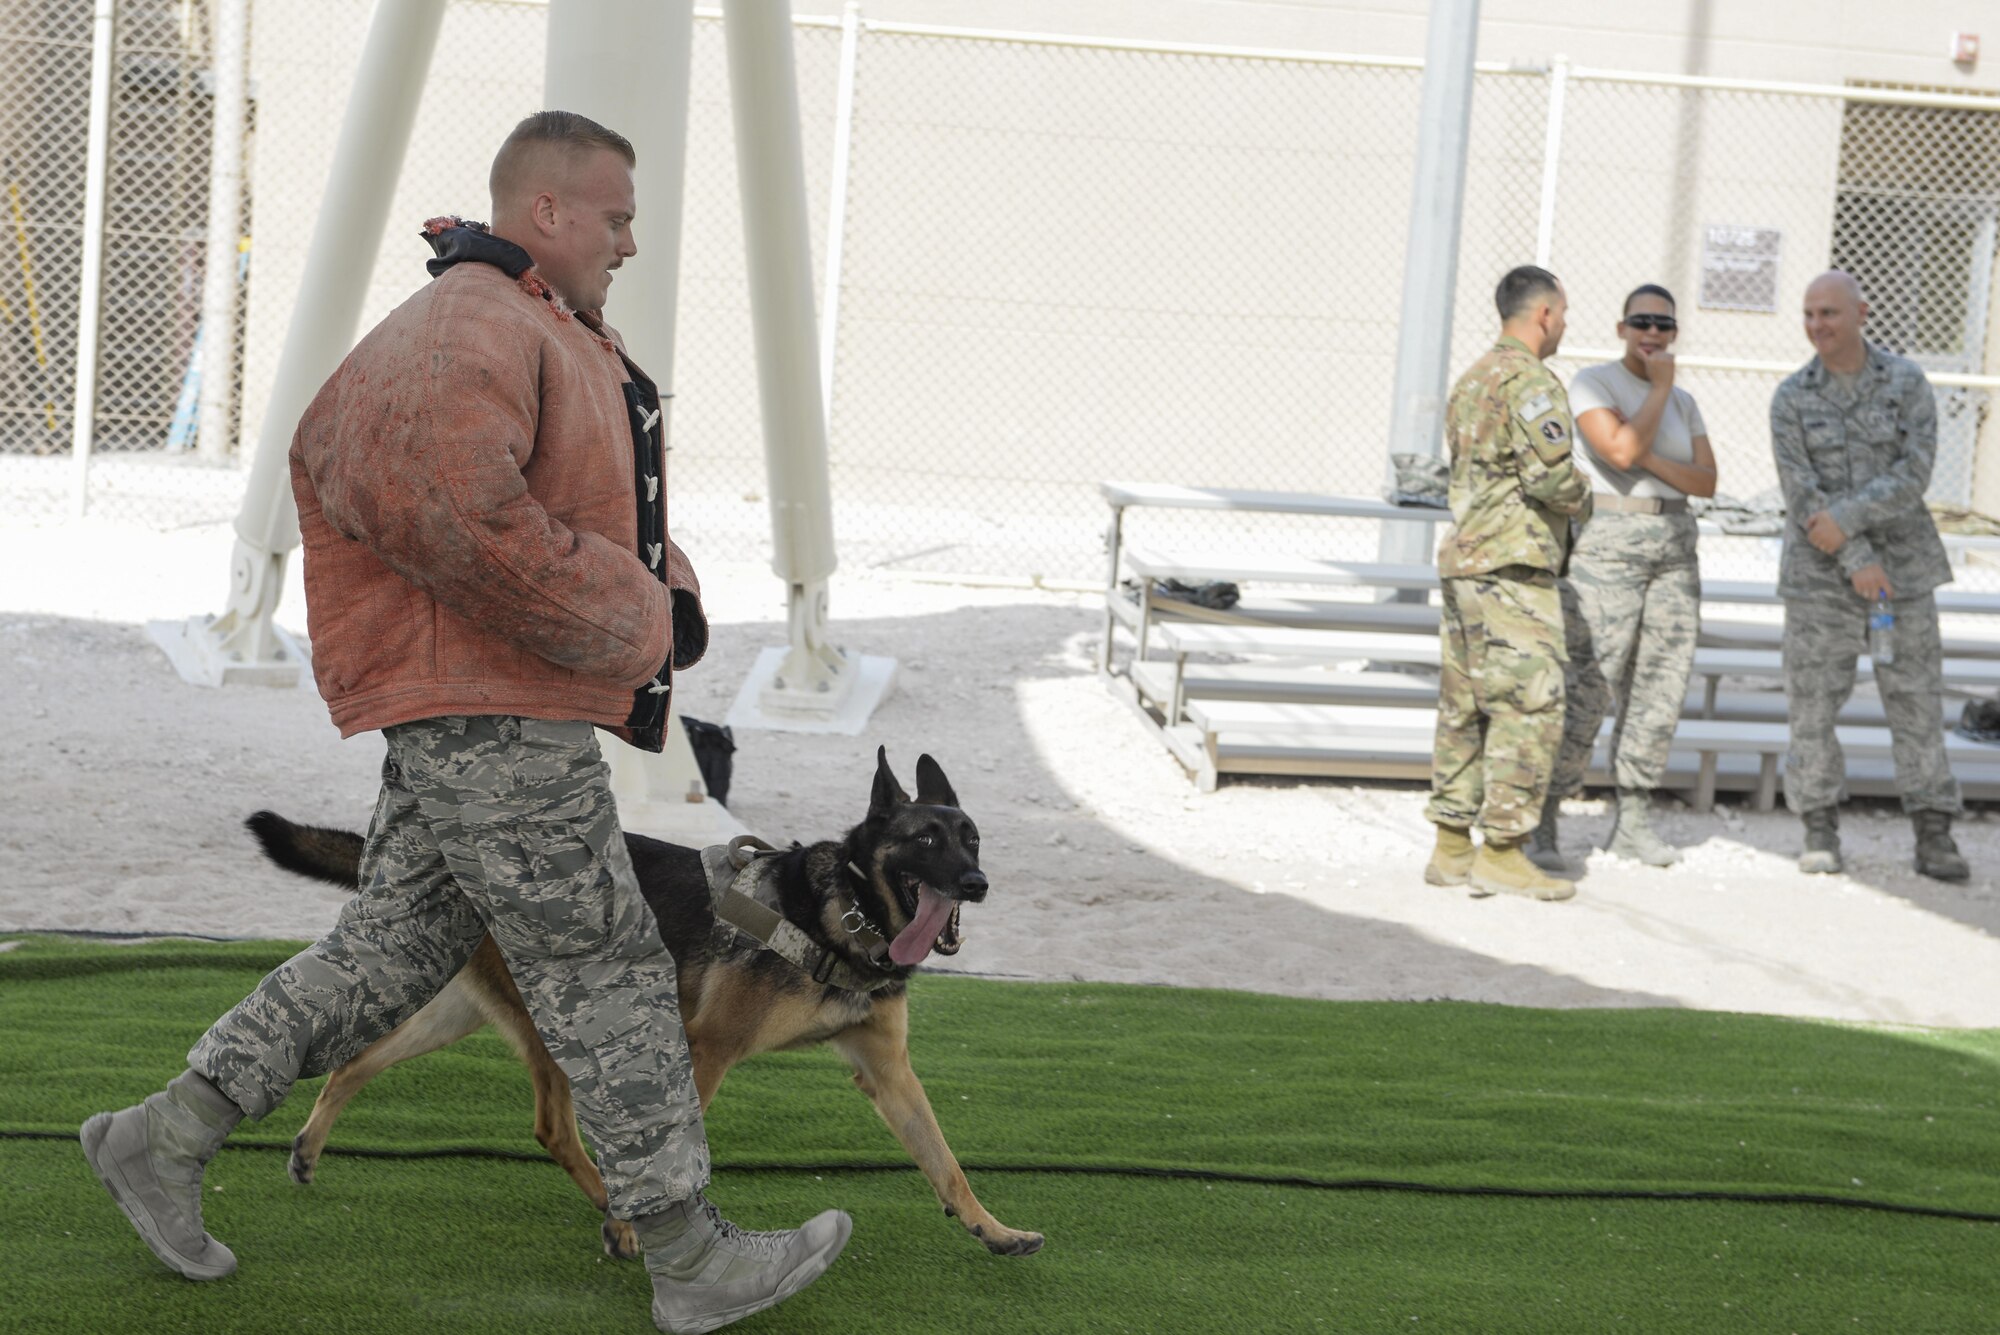 U.S. Air Force Senior Airman Louis Hurbis, military working dog handler assigned to the 379th Expeditionary Security Forces Squadron, is “escorted” after being detained by military working dog, Hugo, during a K-9 demonstration exercise at Al Udeid Air Base, Qatar, Aug. 17, 2017.